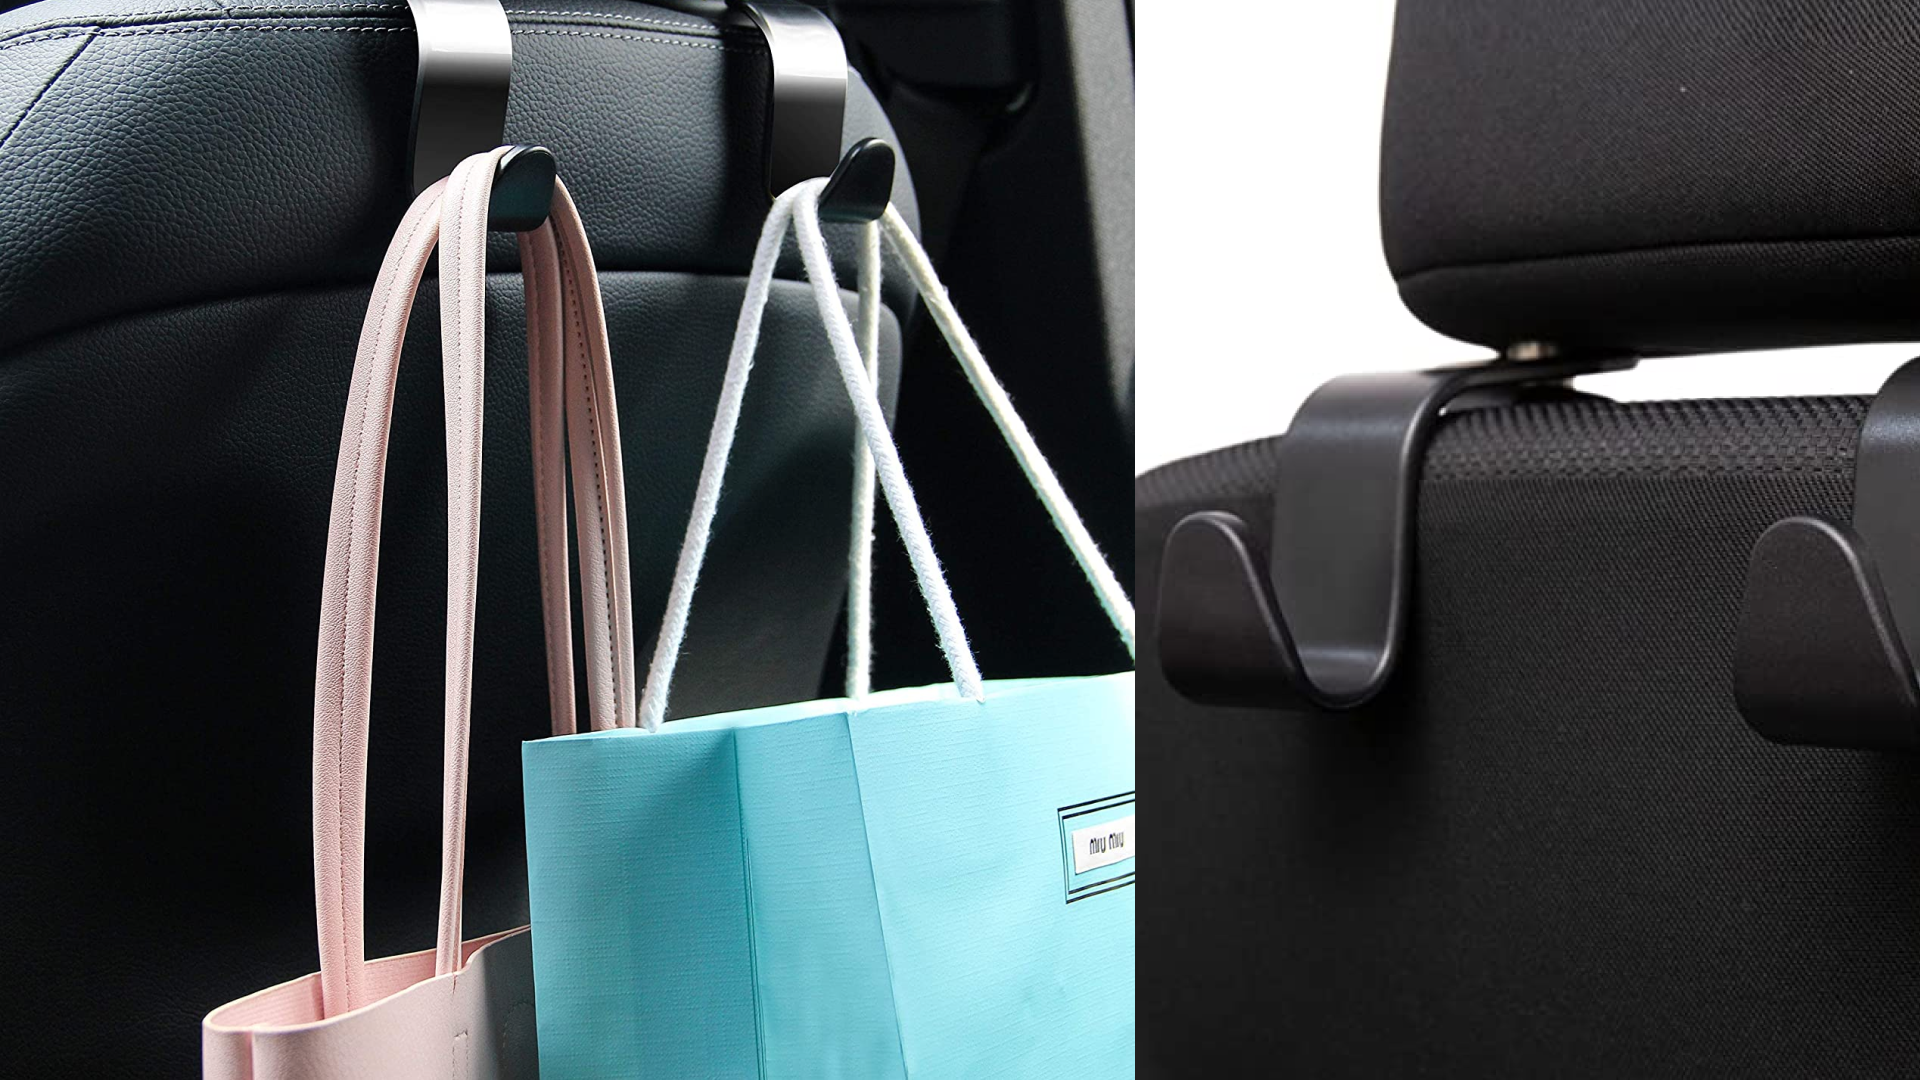 17 Products to Keep Your Car Clean and Organized